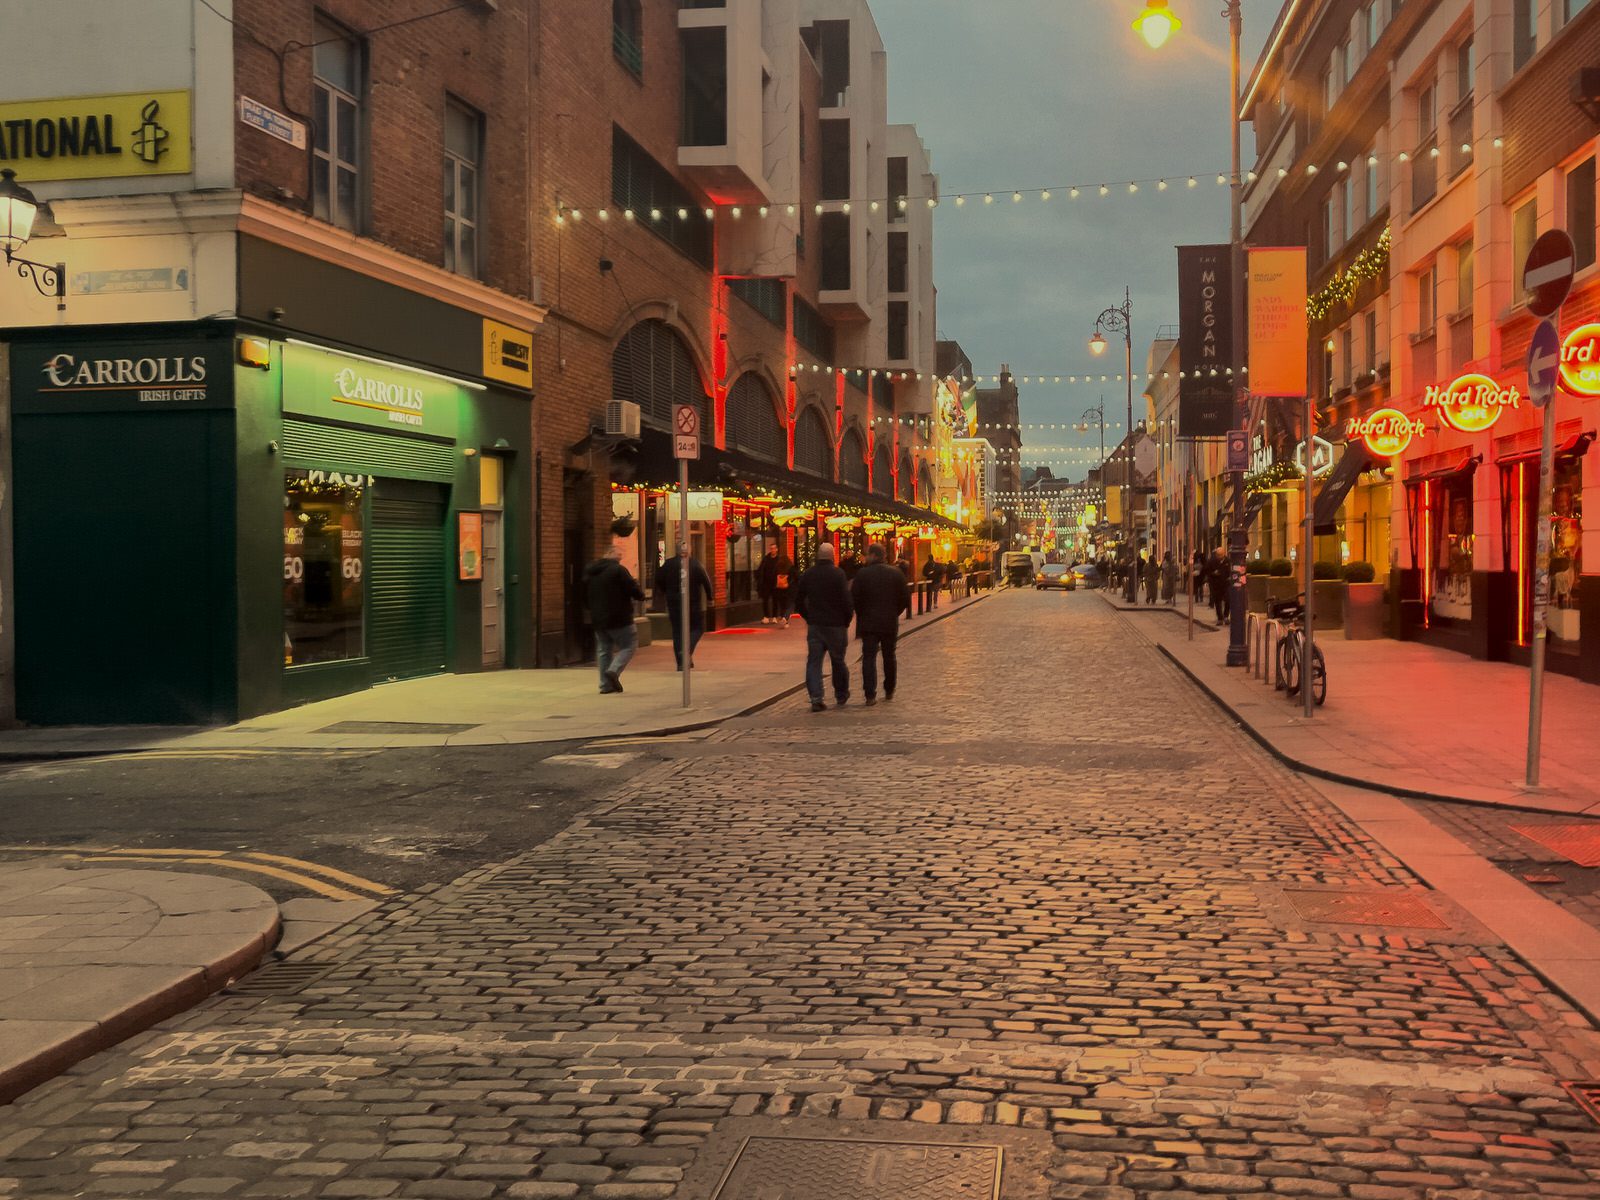 I VISITED TEMPLE BAR TODAY [AS NIGHTFALL WAS APPROACHING]-225329-1